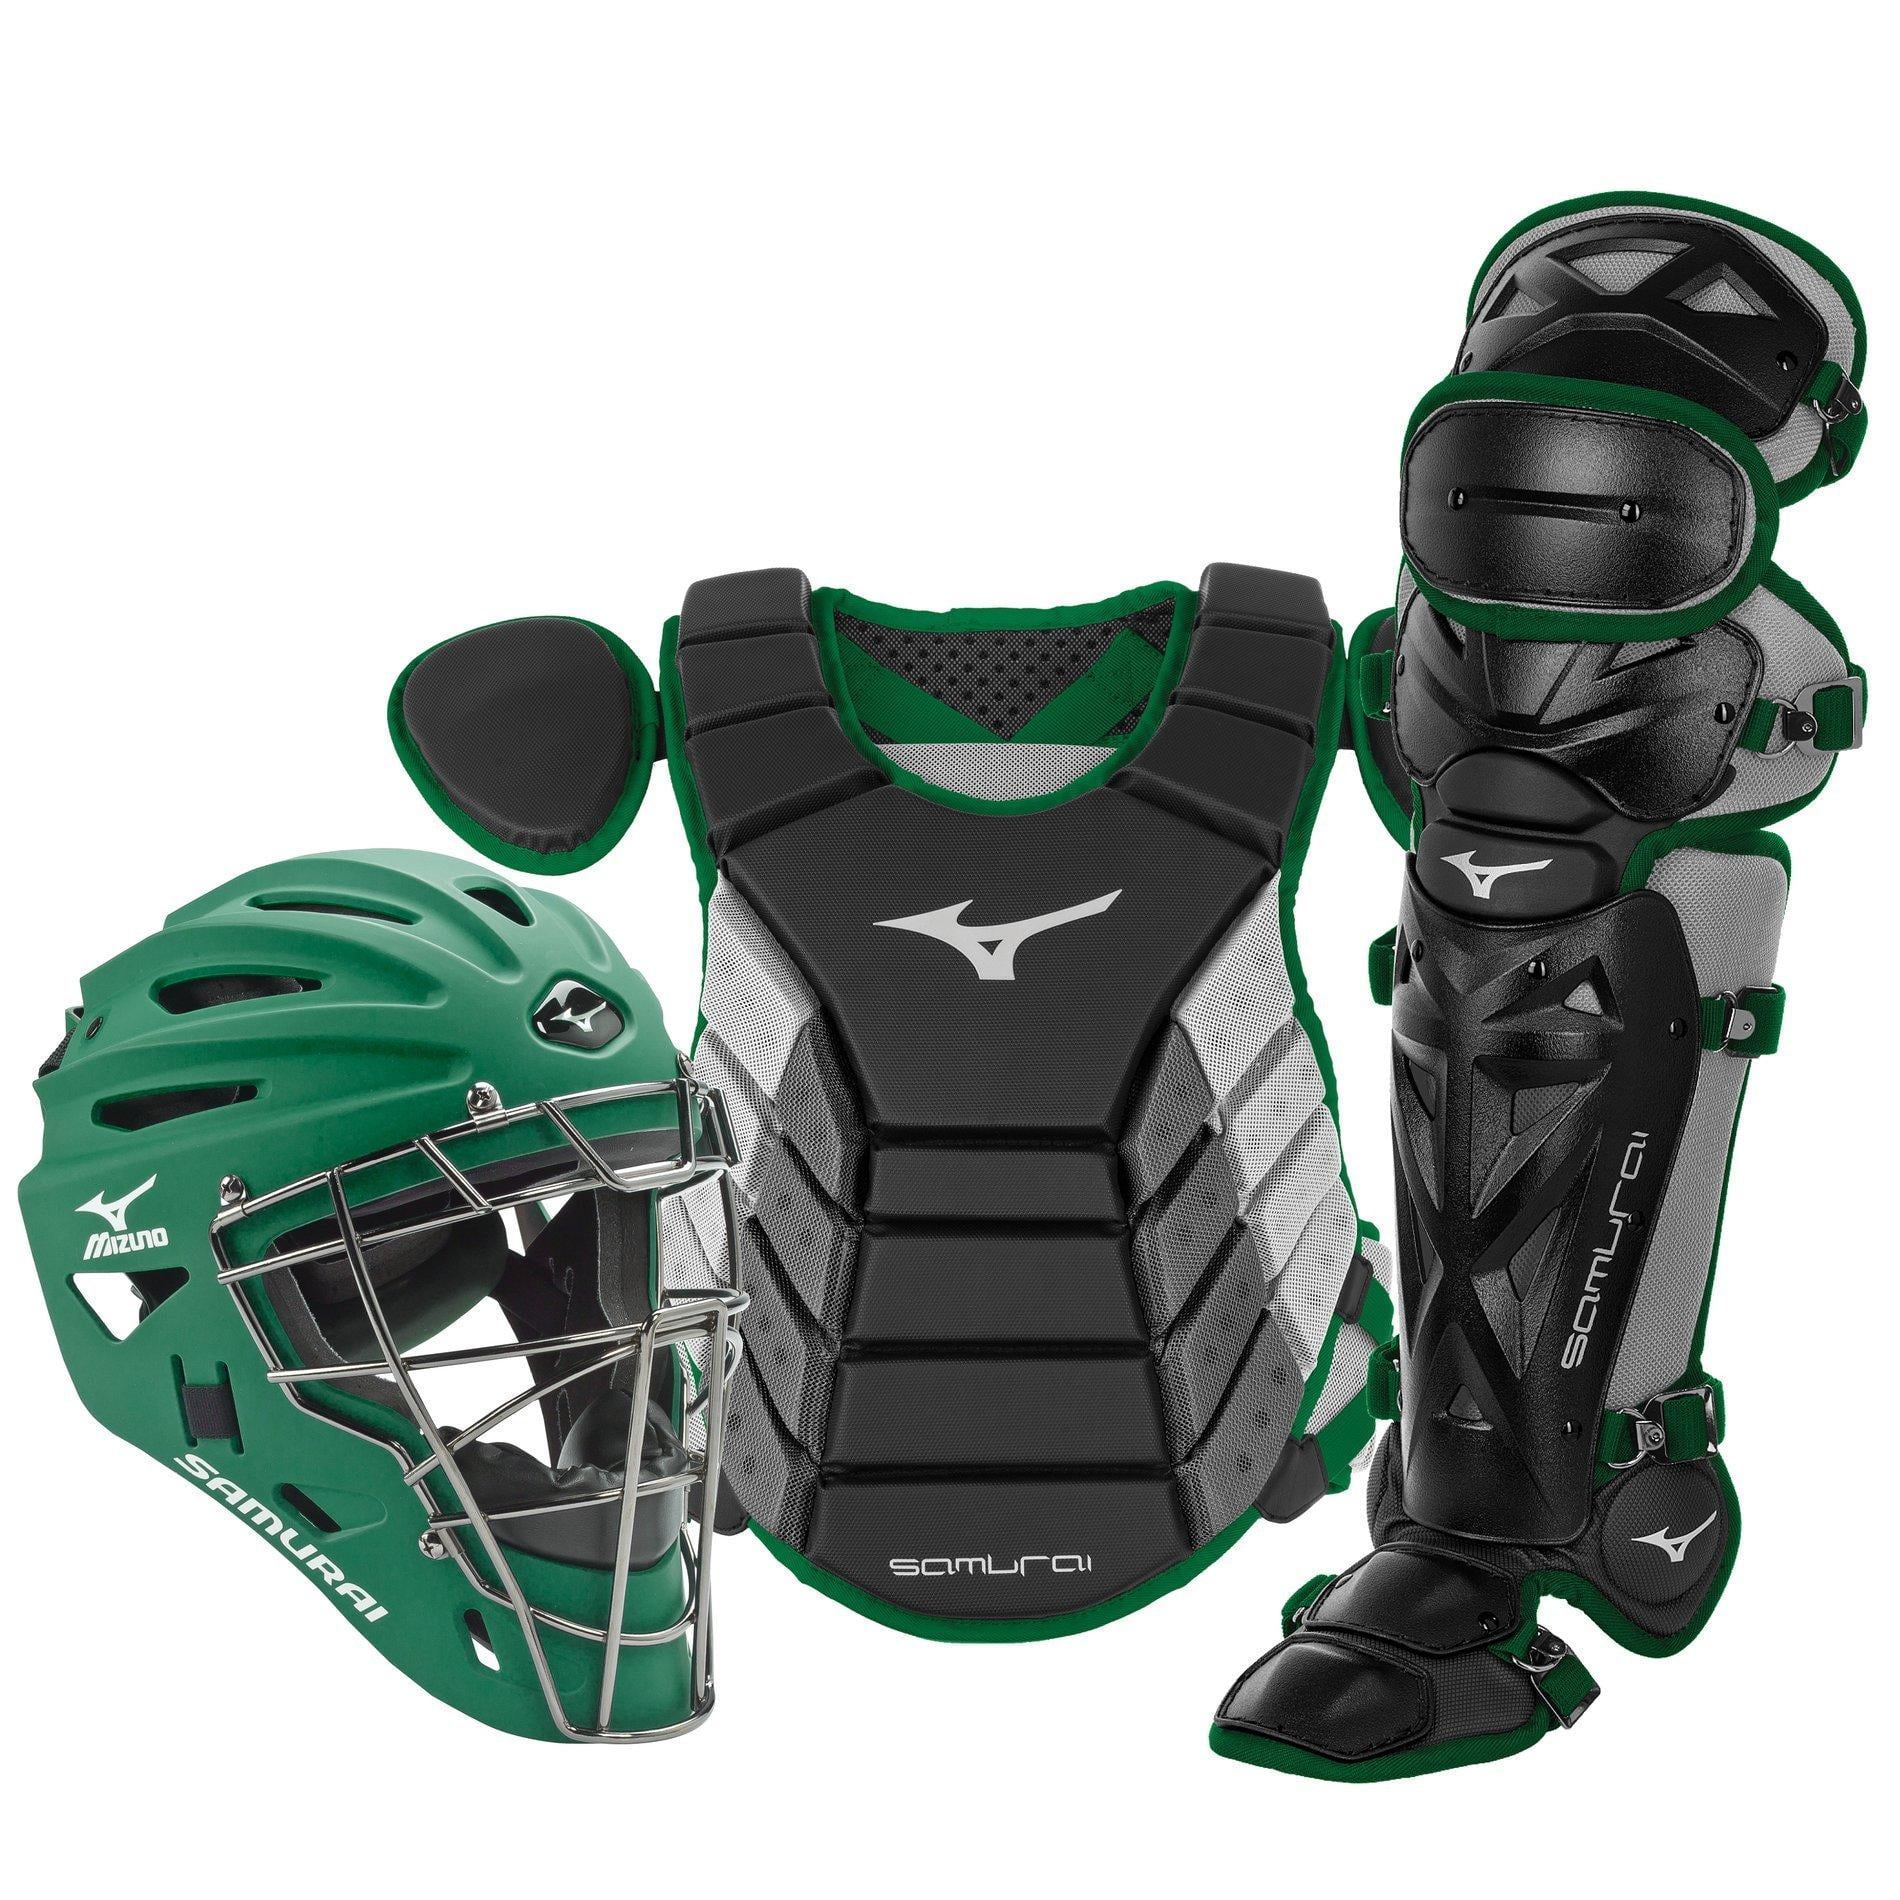 CHAMPRO Optimus Pro Plus Catcher’s Gear Box Set Kit with NOCSAE Standard Certified Headgear and Chest Protector